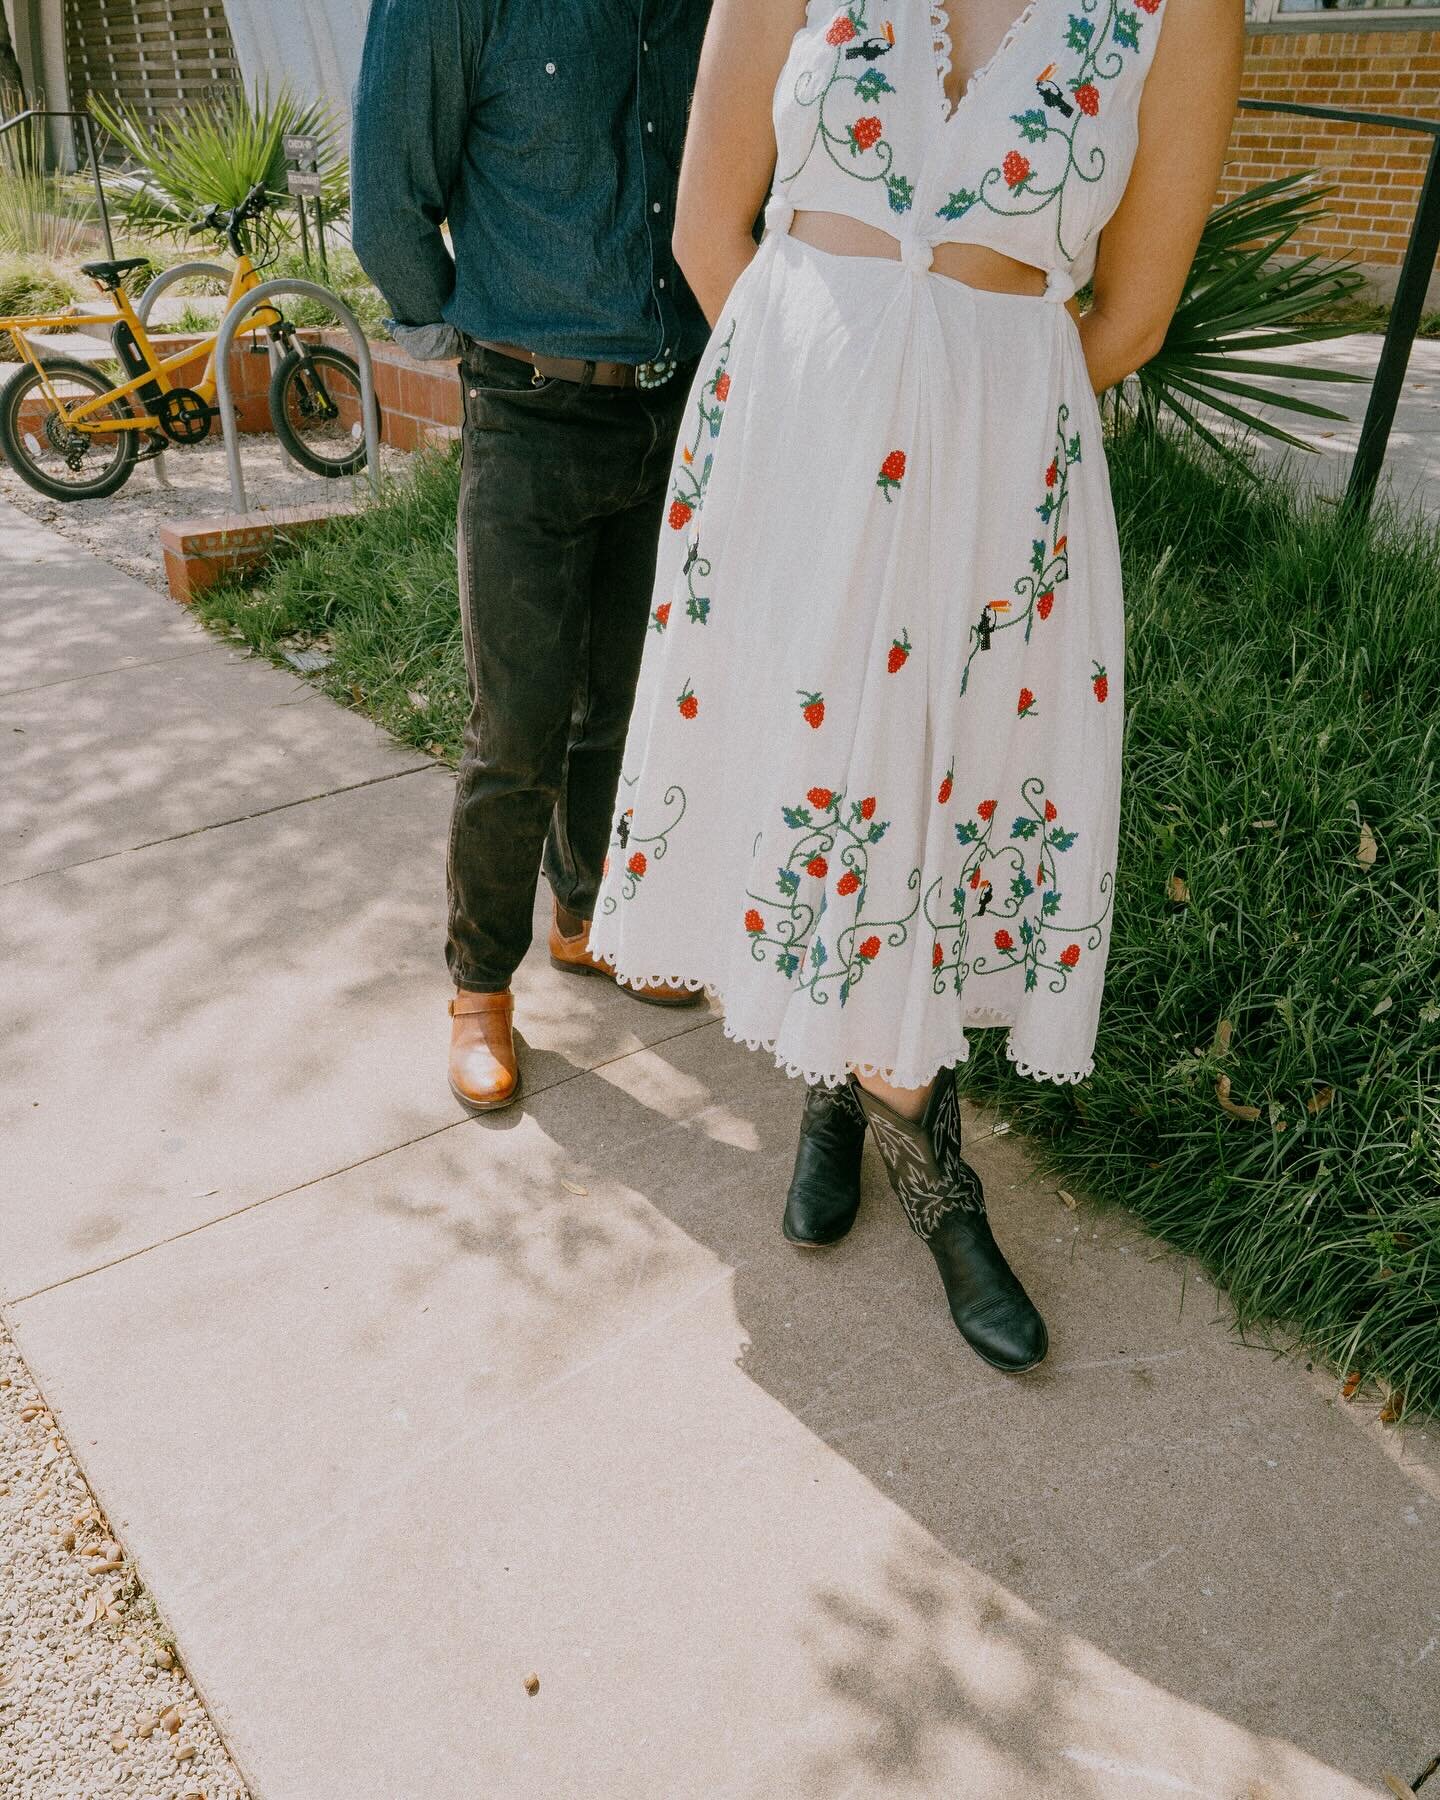 These Chicago babes really put the yee in the haw *tips hat*

@camiteran_ 

#austinweddingphotographer #austinengagementphotographer #austincouplesphotographer #austintx #atxweddingphotographer #intimateweddingphotographer #weddingfilmphotographer #e